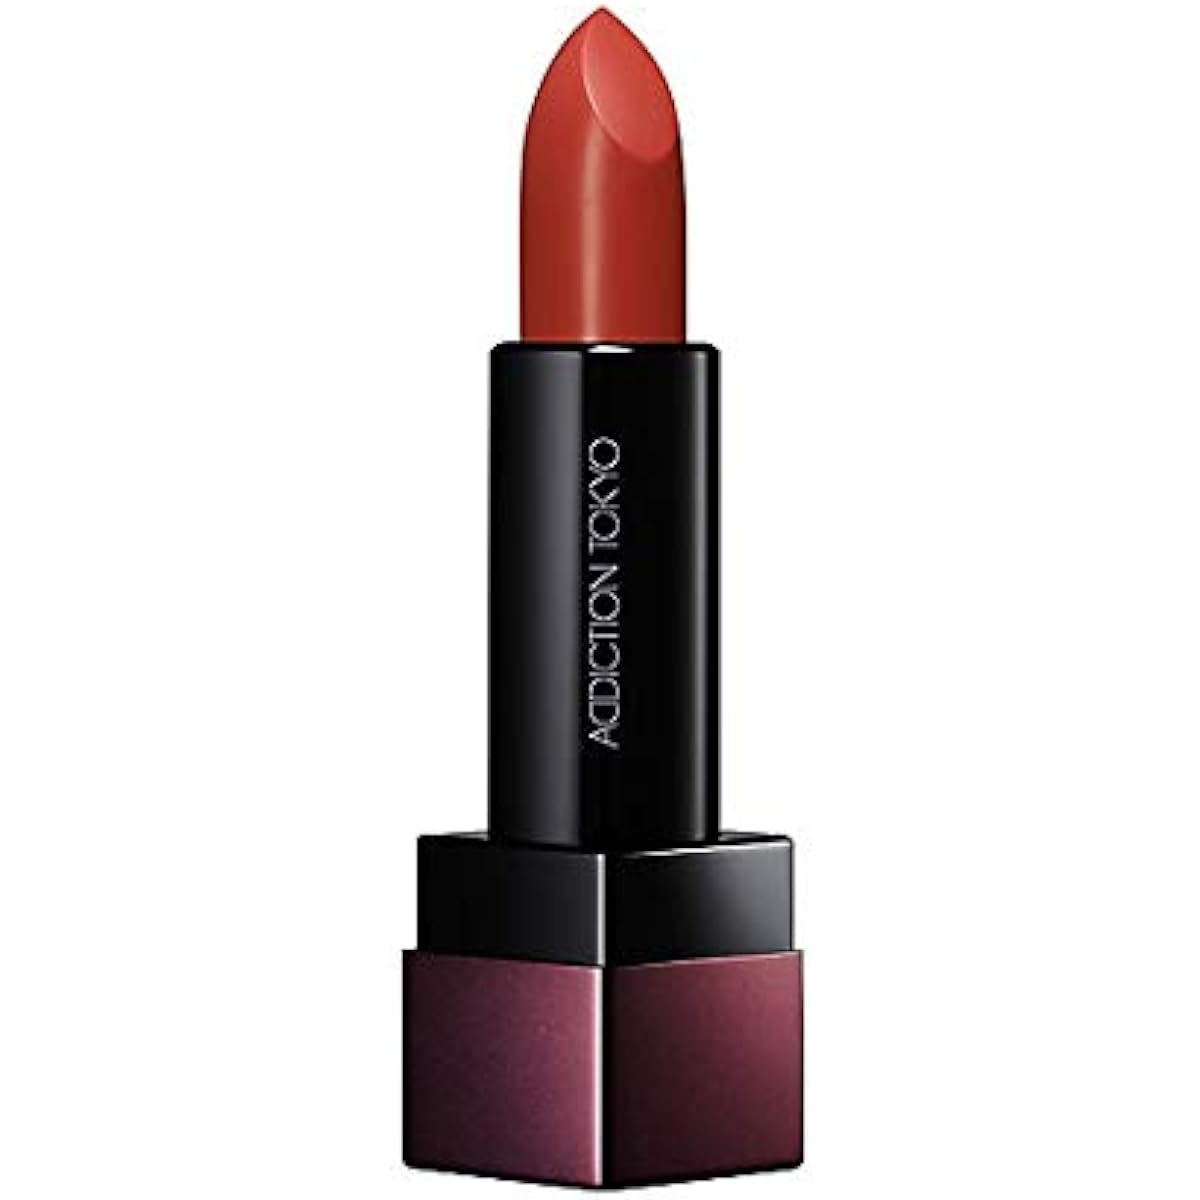 Addiction The Lipstick Sheer L (Limited Edition) 016 Laterite